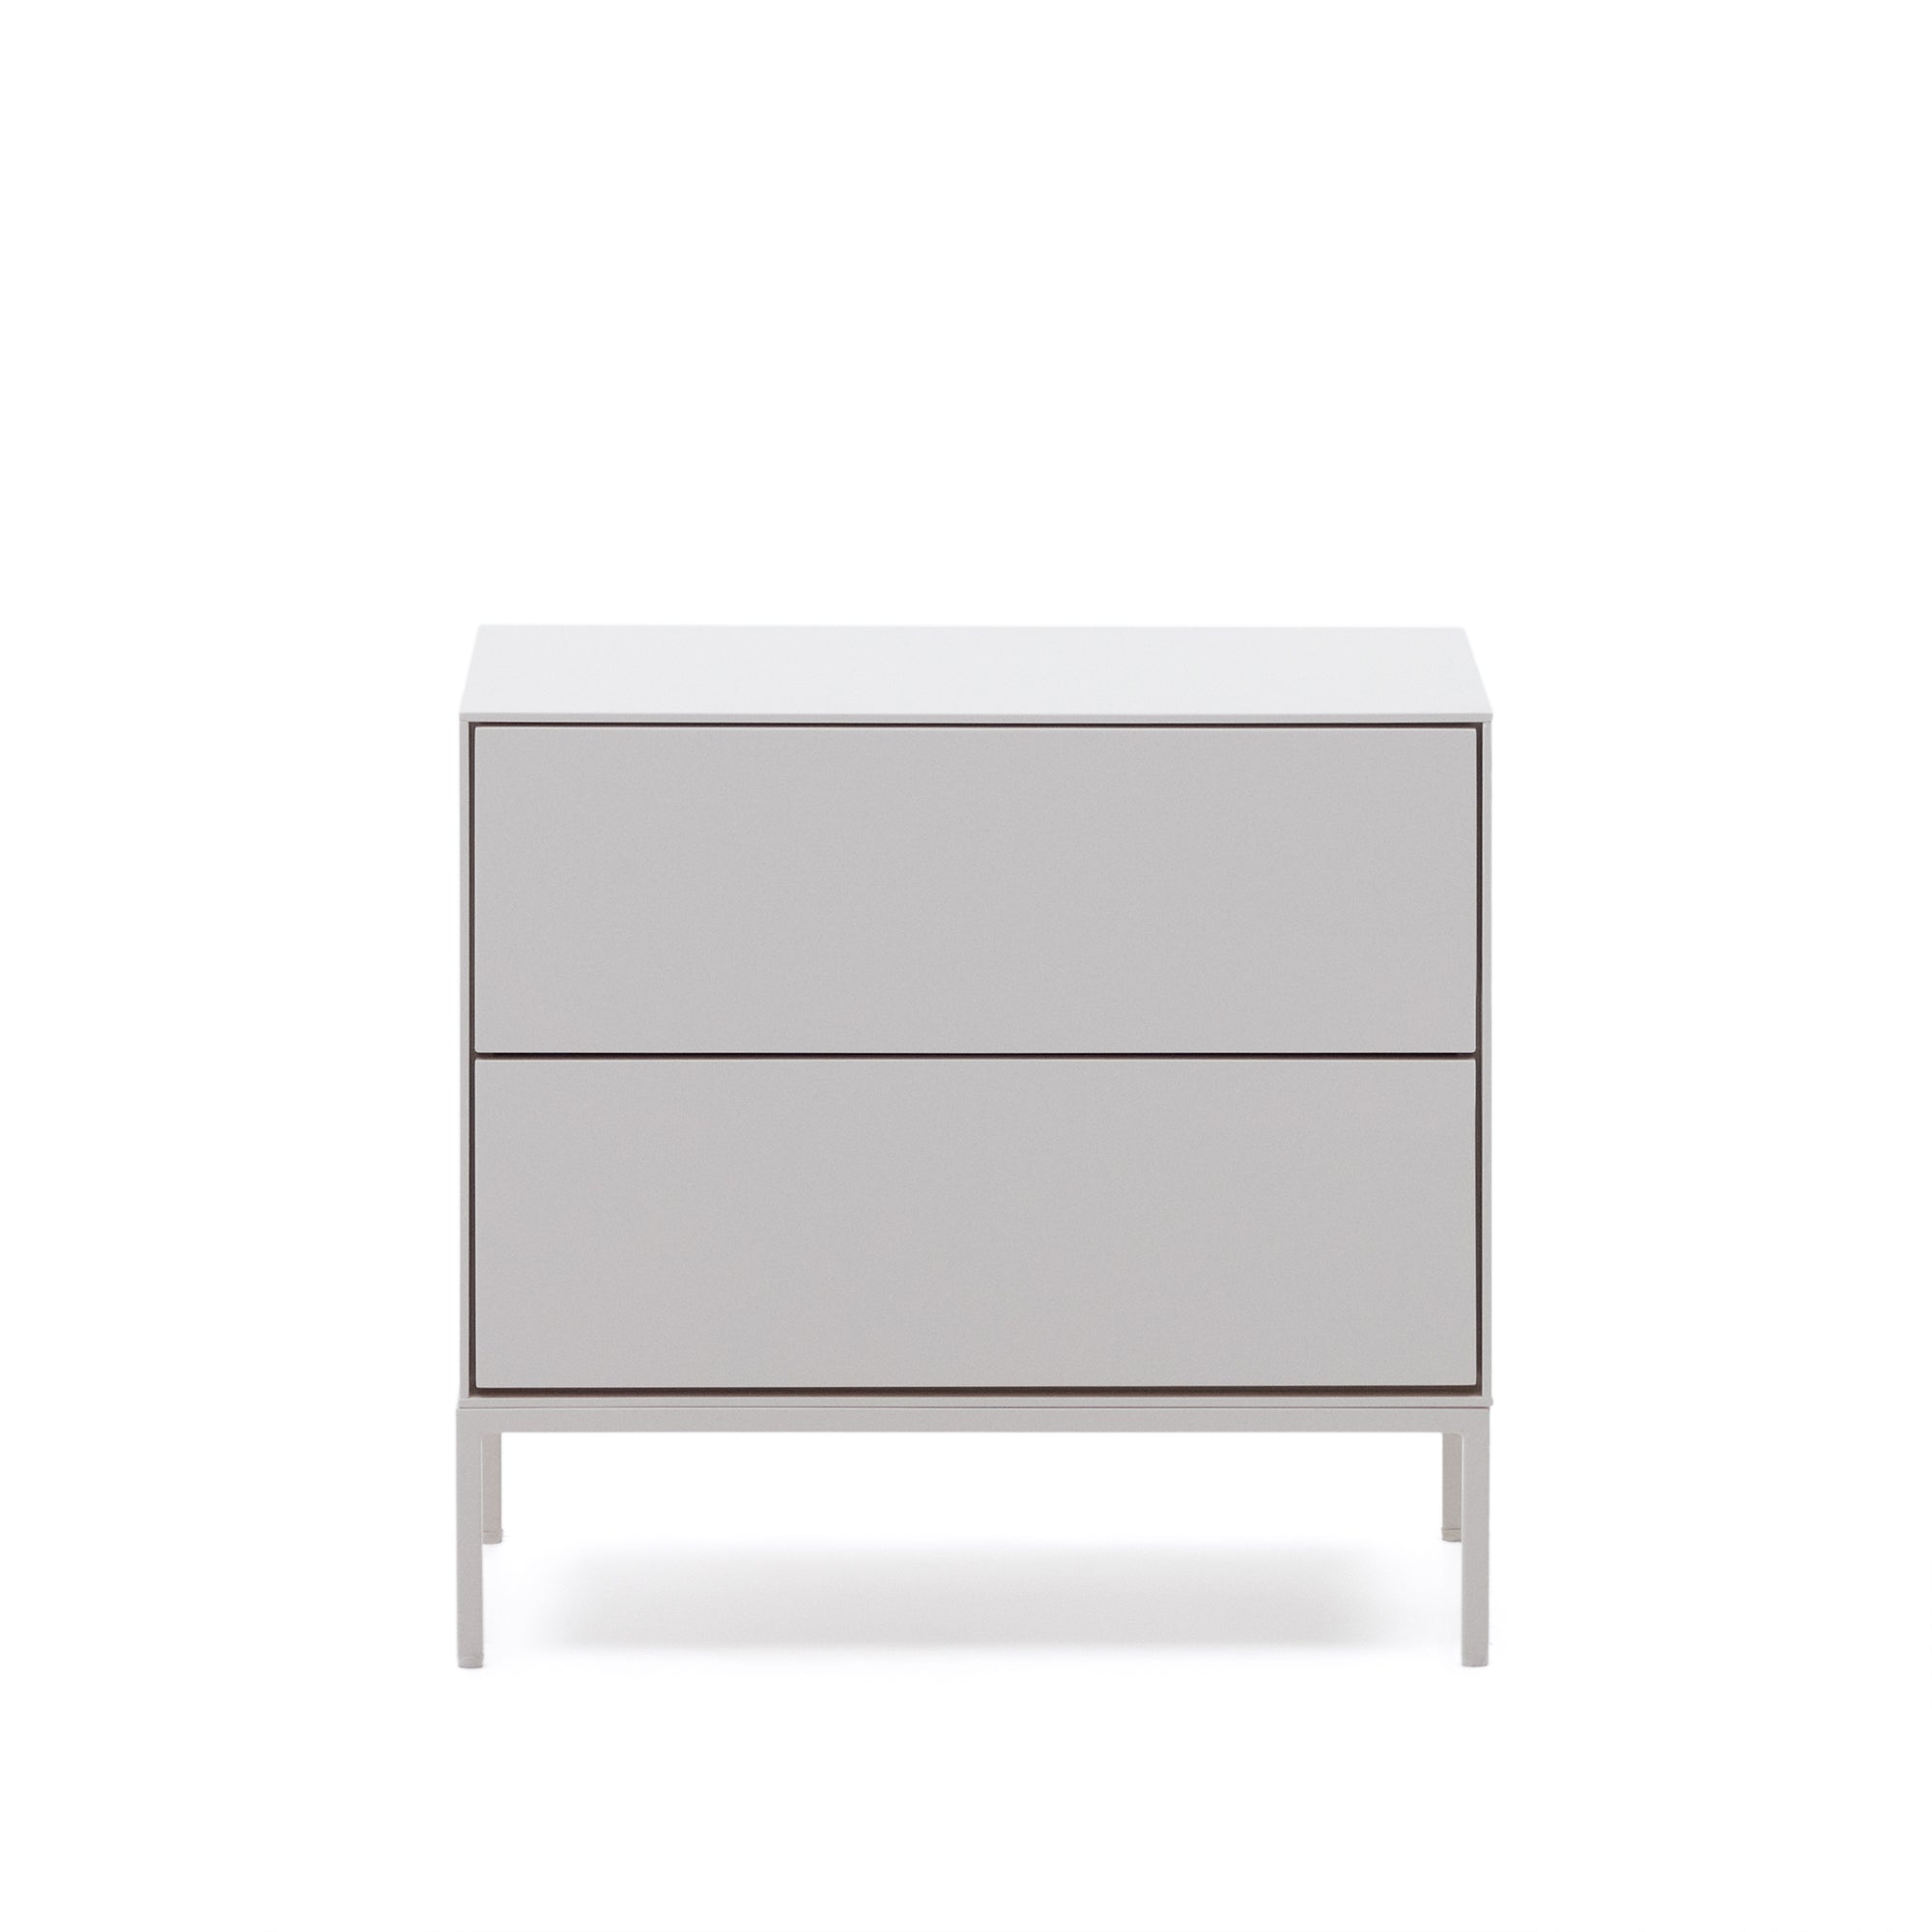 Vedrana two-drawer bedside table white lacquered MDF 60 x 55 cm